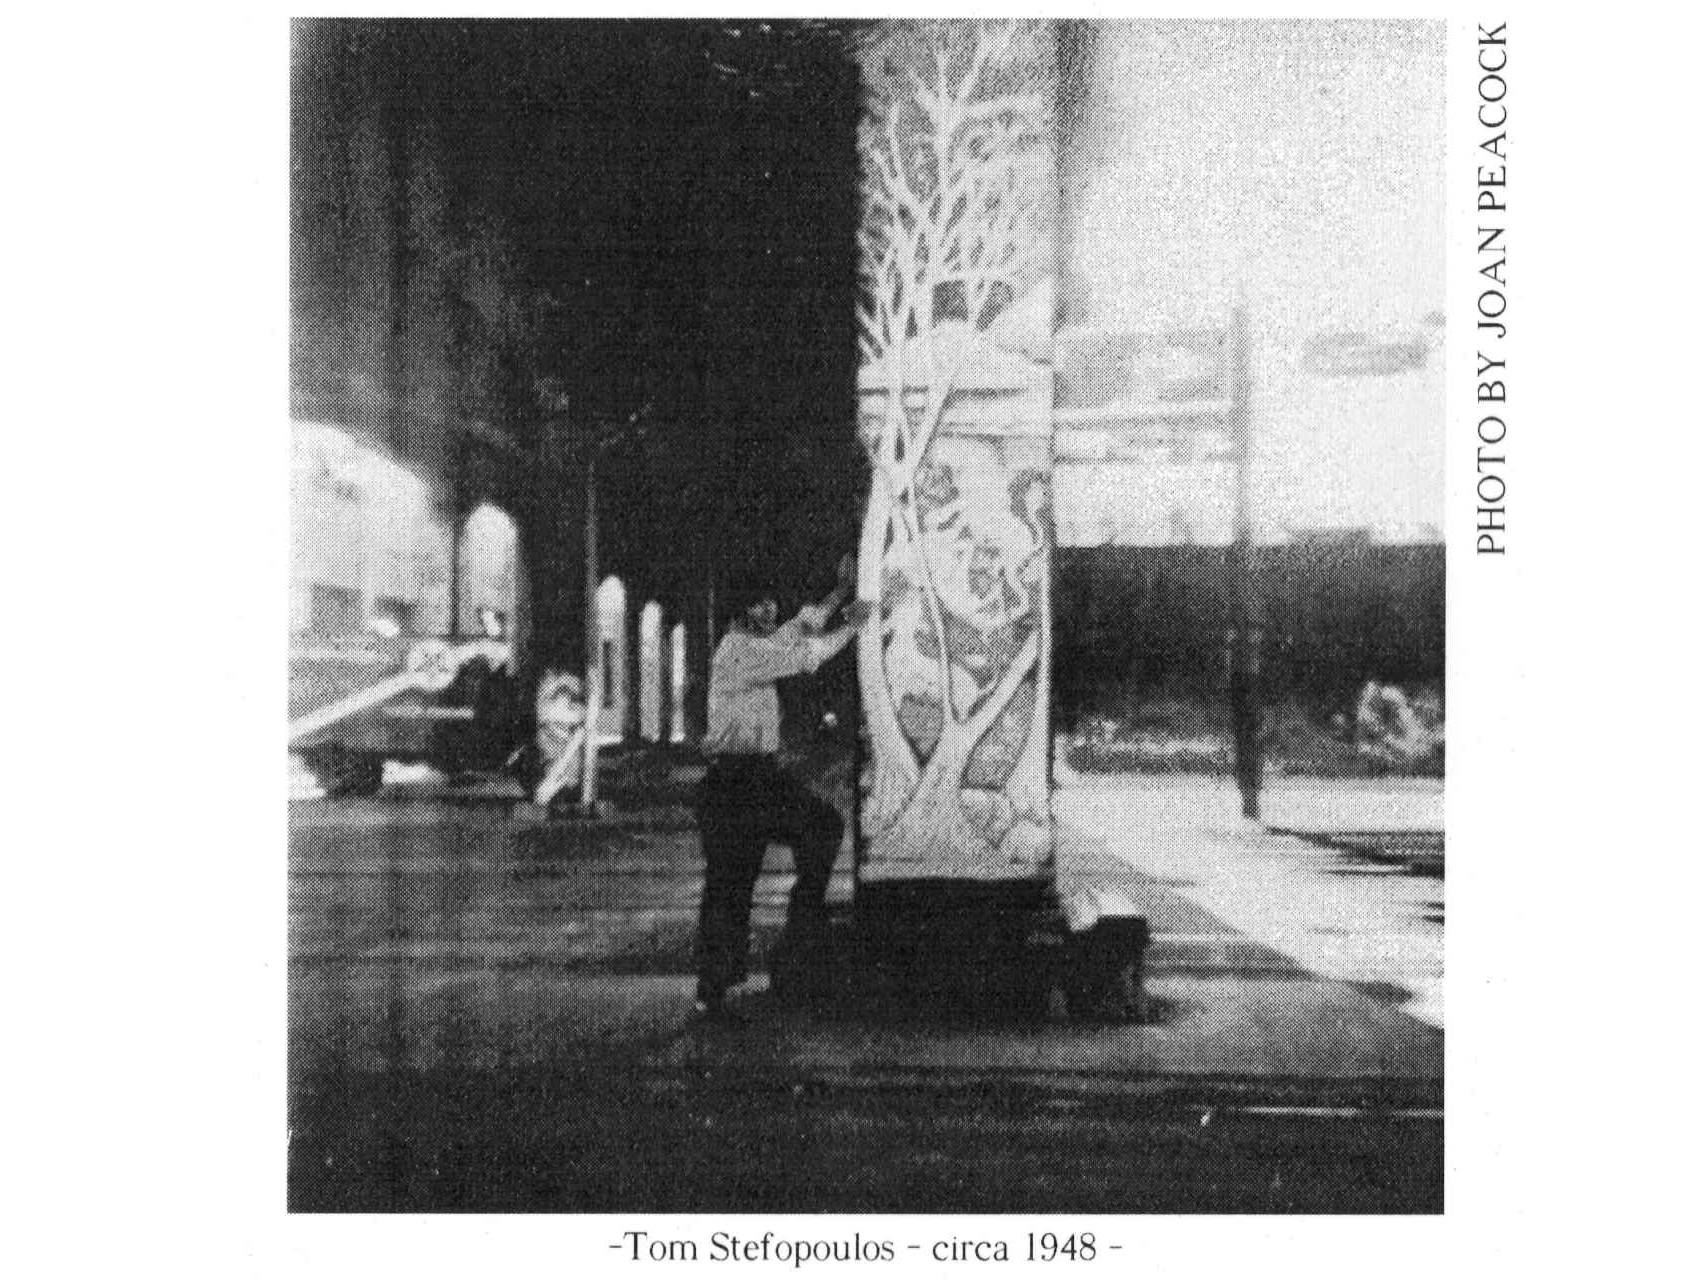 Stefopuolos Square- Tom with Painted Mural